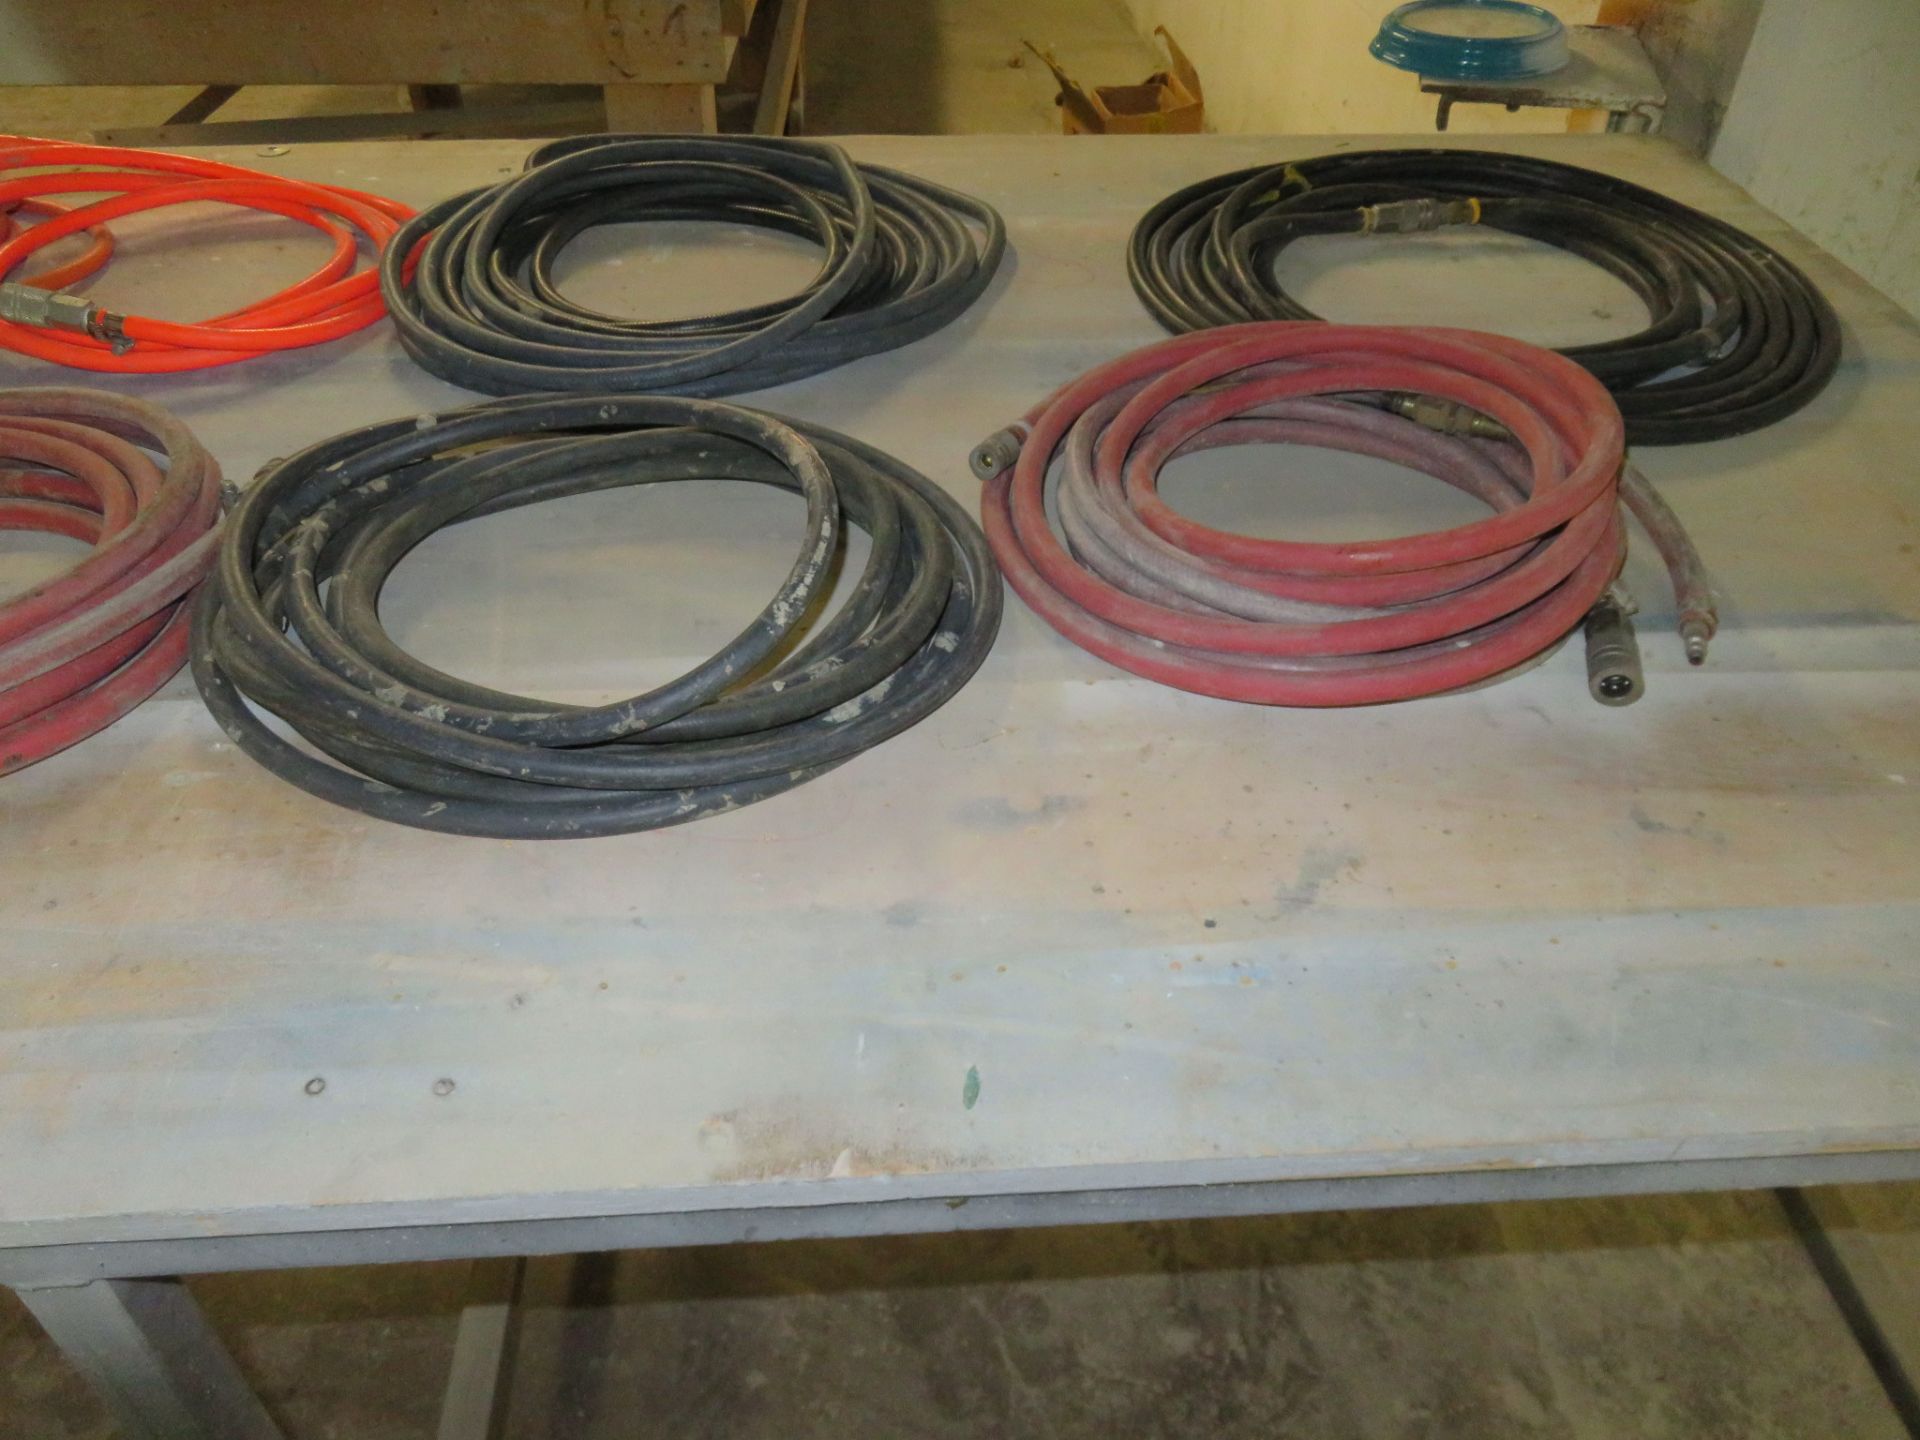 Welded Work Table approx 4'x8' & Hoses Lot - Image 3 of 4